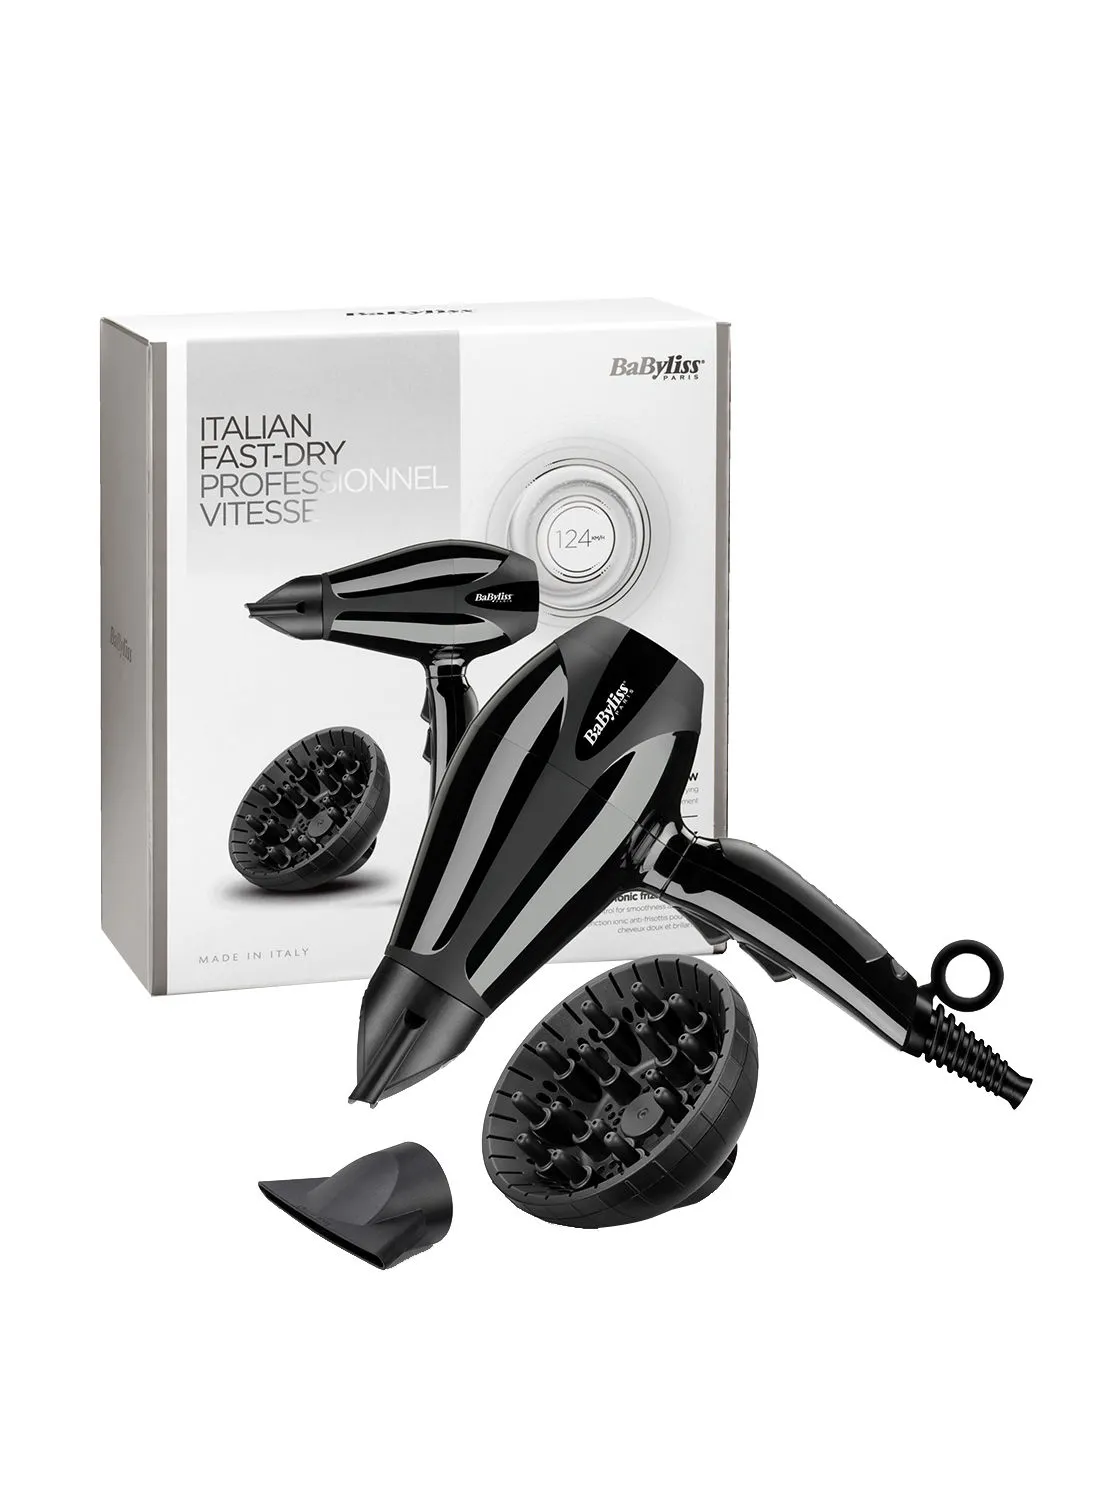 babyliss Compact Pro 2400 ​Hair Dryer Ac, Italian Made For Quality And Long-Lasting Performance, Ultra-Slim Nozzle With Ionic Frizz Control Technology, Portable Dryer With Diffuser - 6715DSDE, Black Black 243x94x262mm